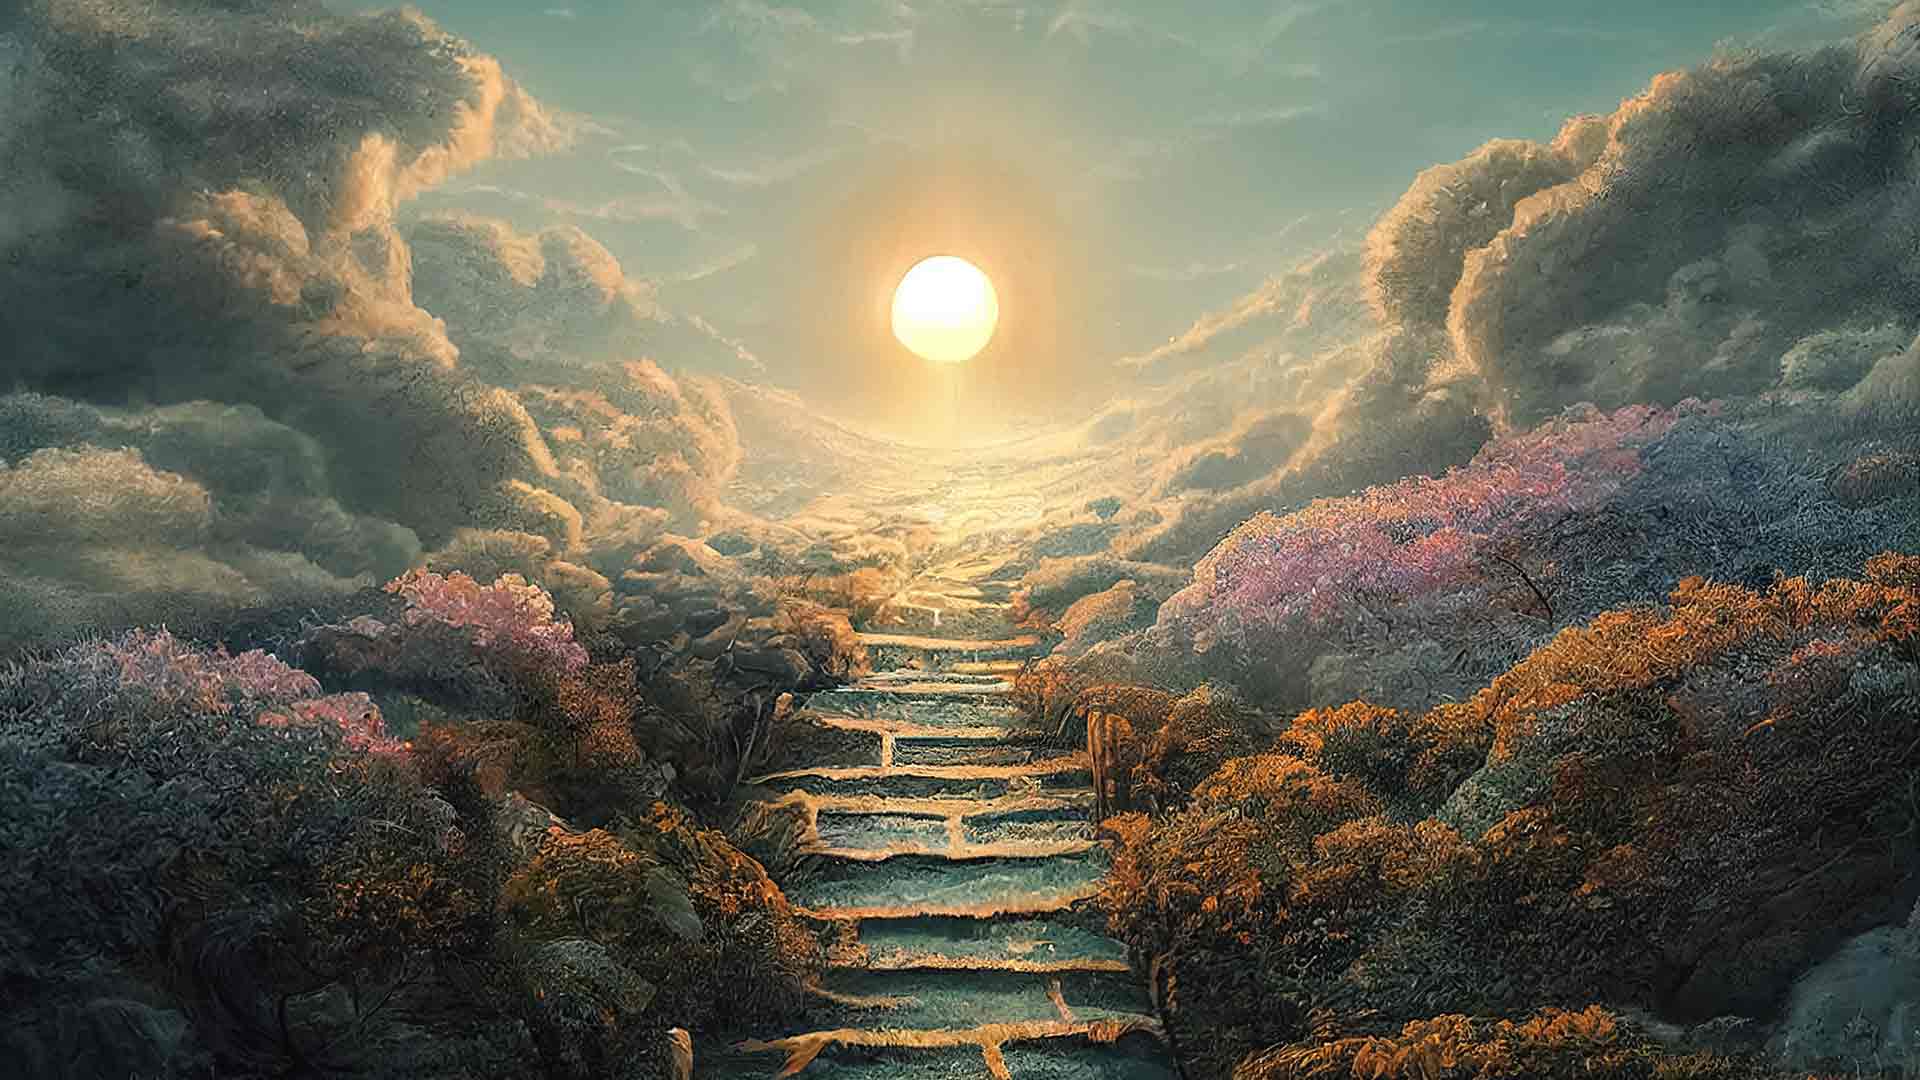 Stock art of a stairway leading up to the clouds and sun.